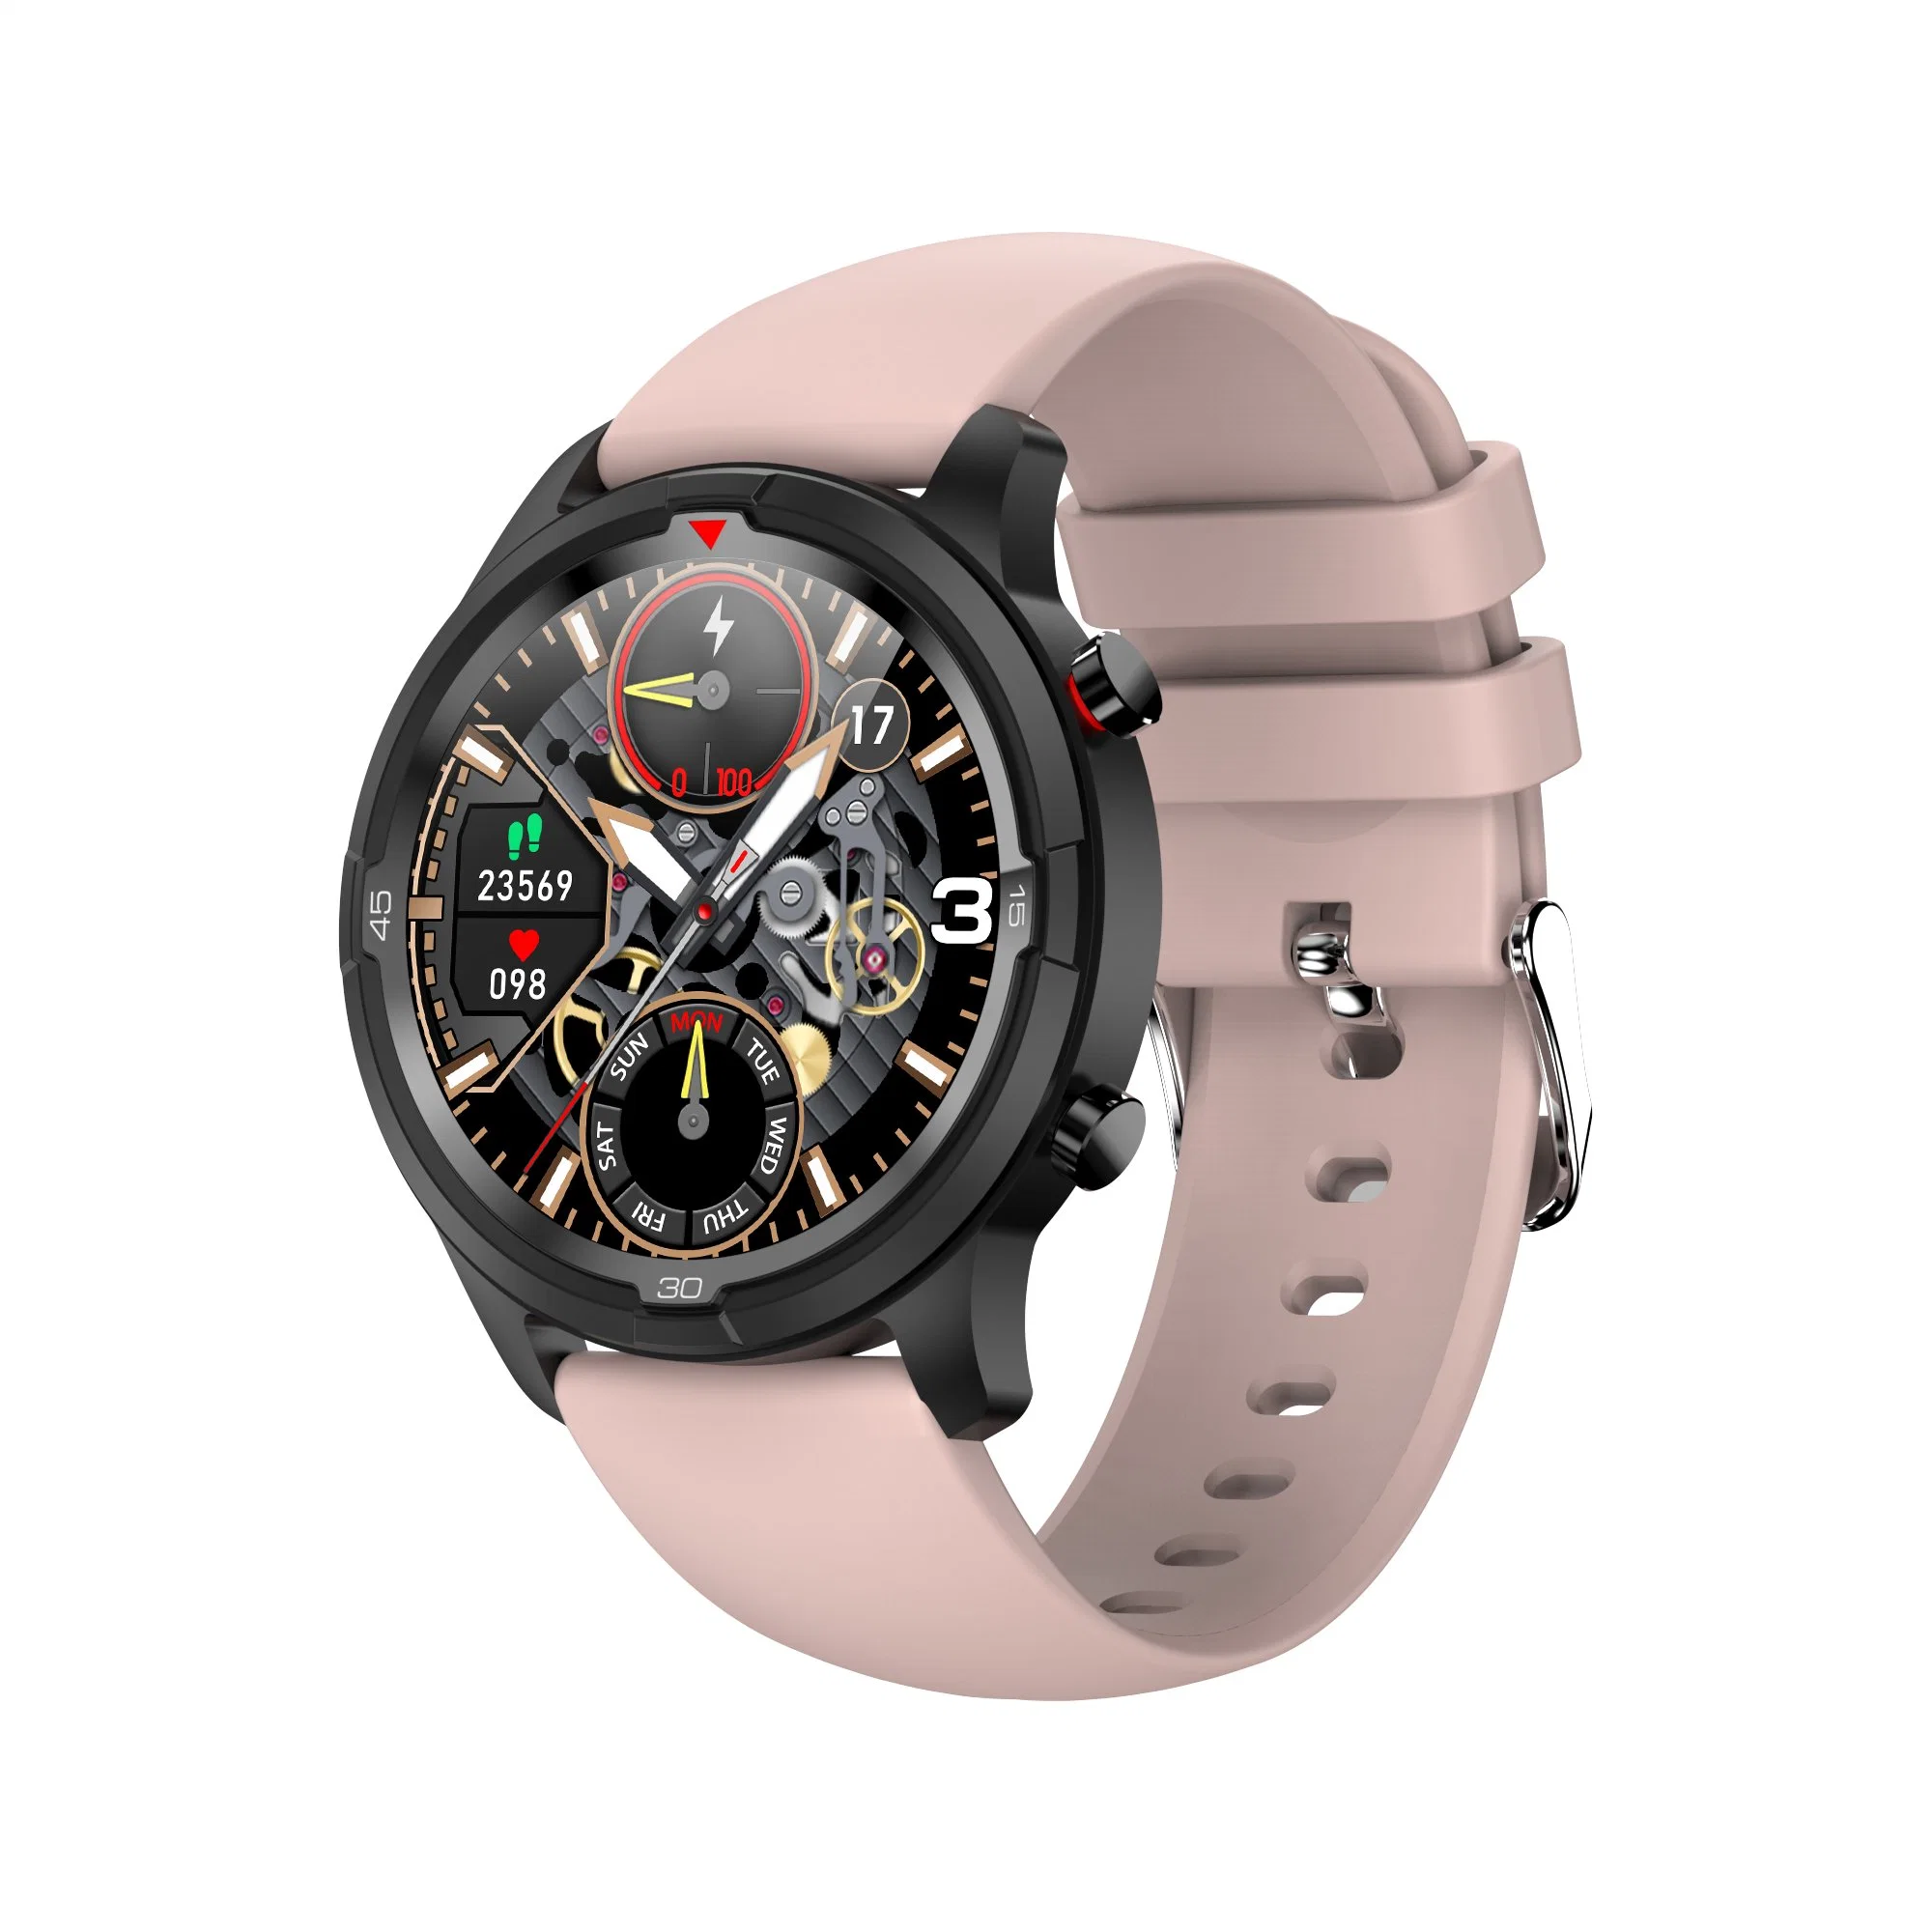 2022 New Design Full Screen Touch Control Wrist Watch with Healthcare Monitoring